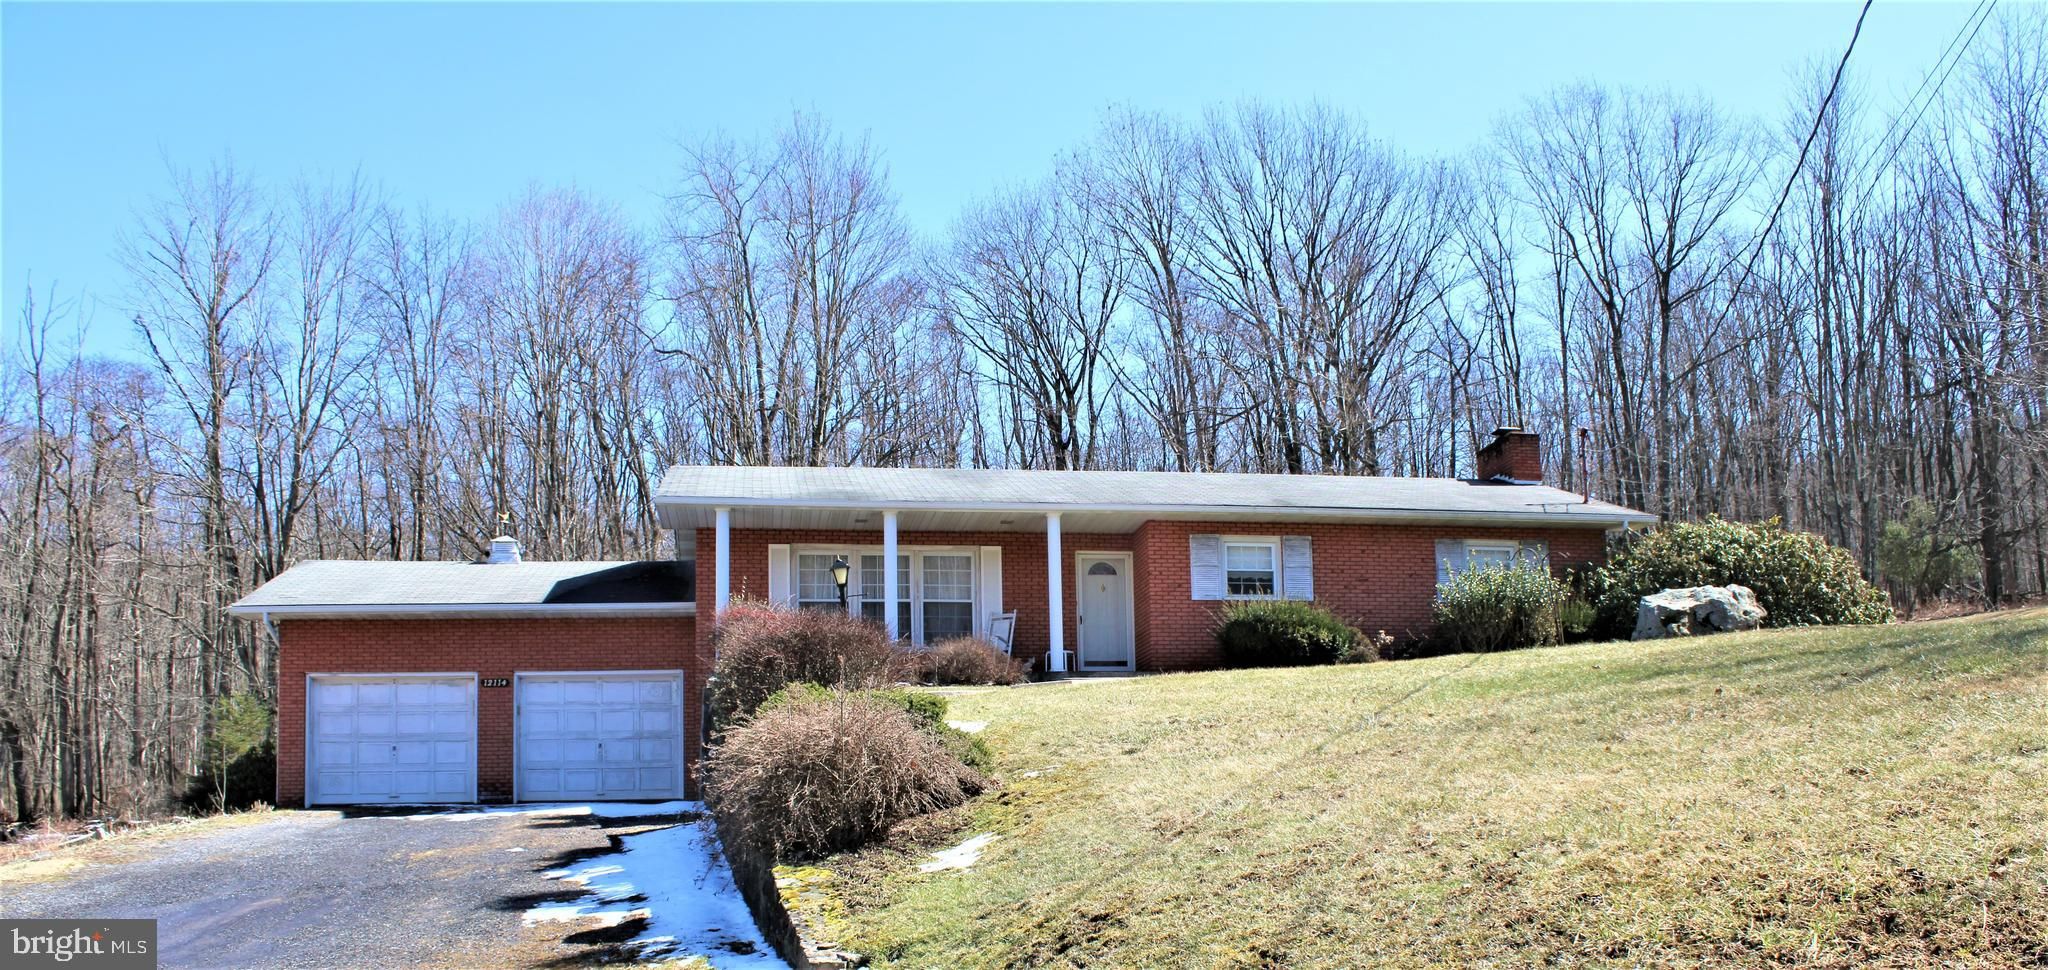 12114 Vale Summit Rd SW, Frostburg, MD 21532 MLS# MDAL2002622 Trulia pic picture